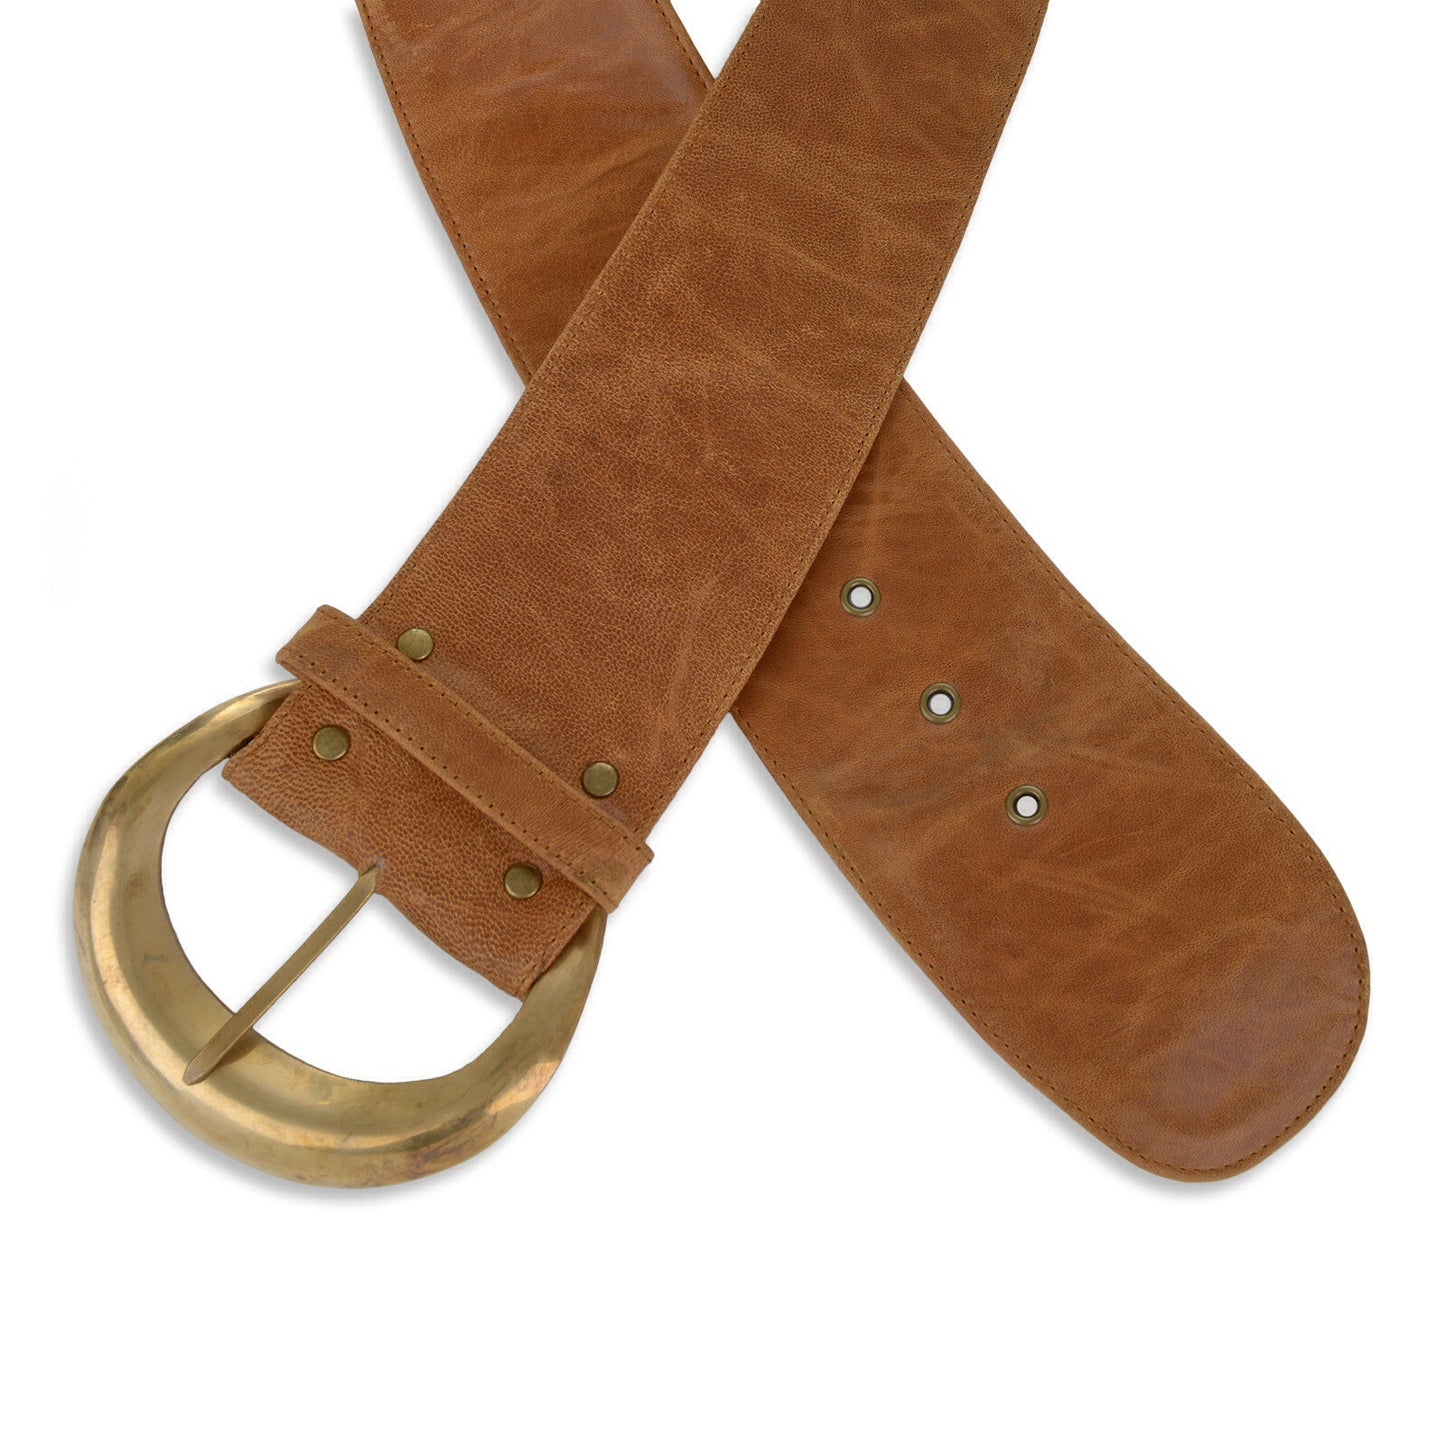 Moon Belt Classic in Tan Leather and Gold Buckle